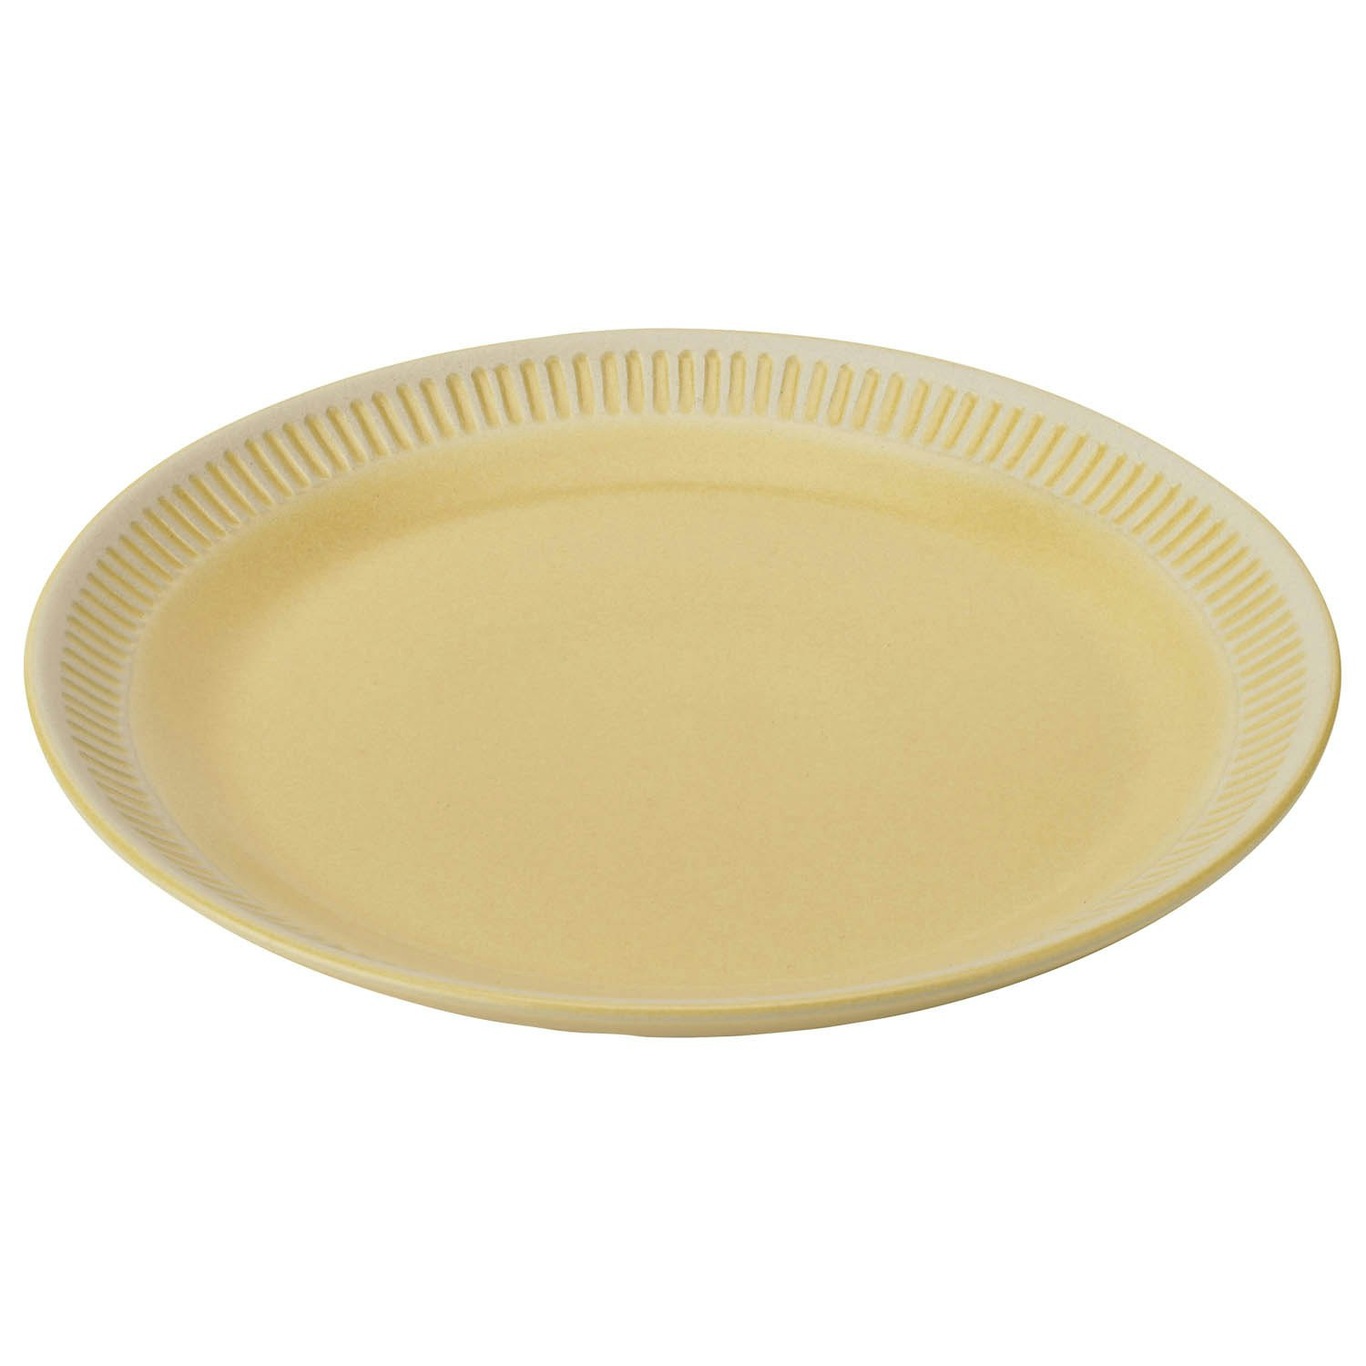 Colorit Plate 22 cm, Yellow